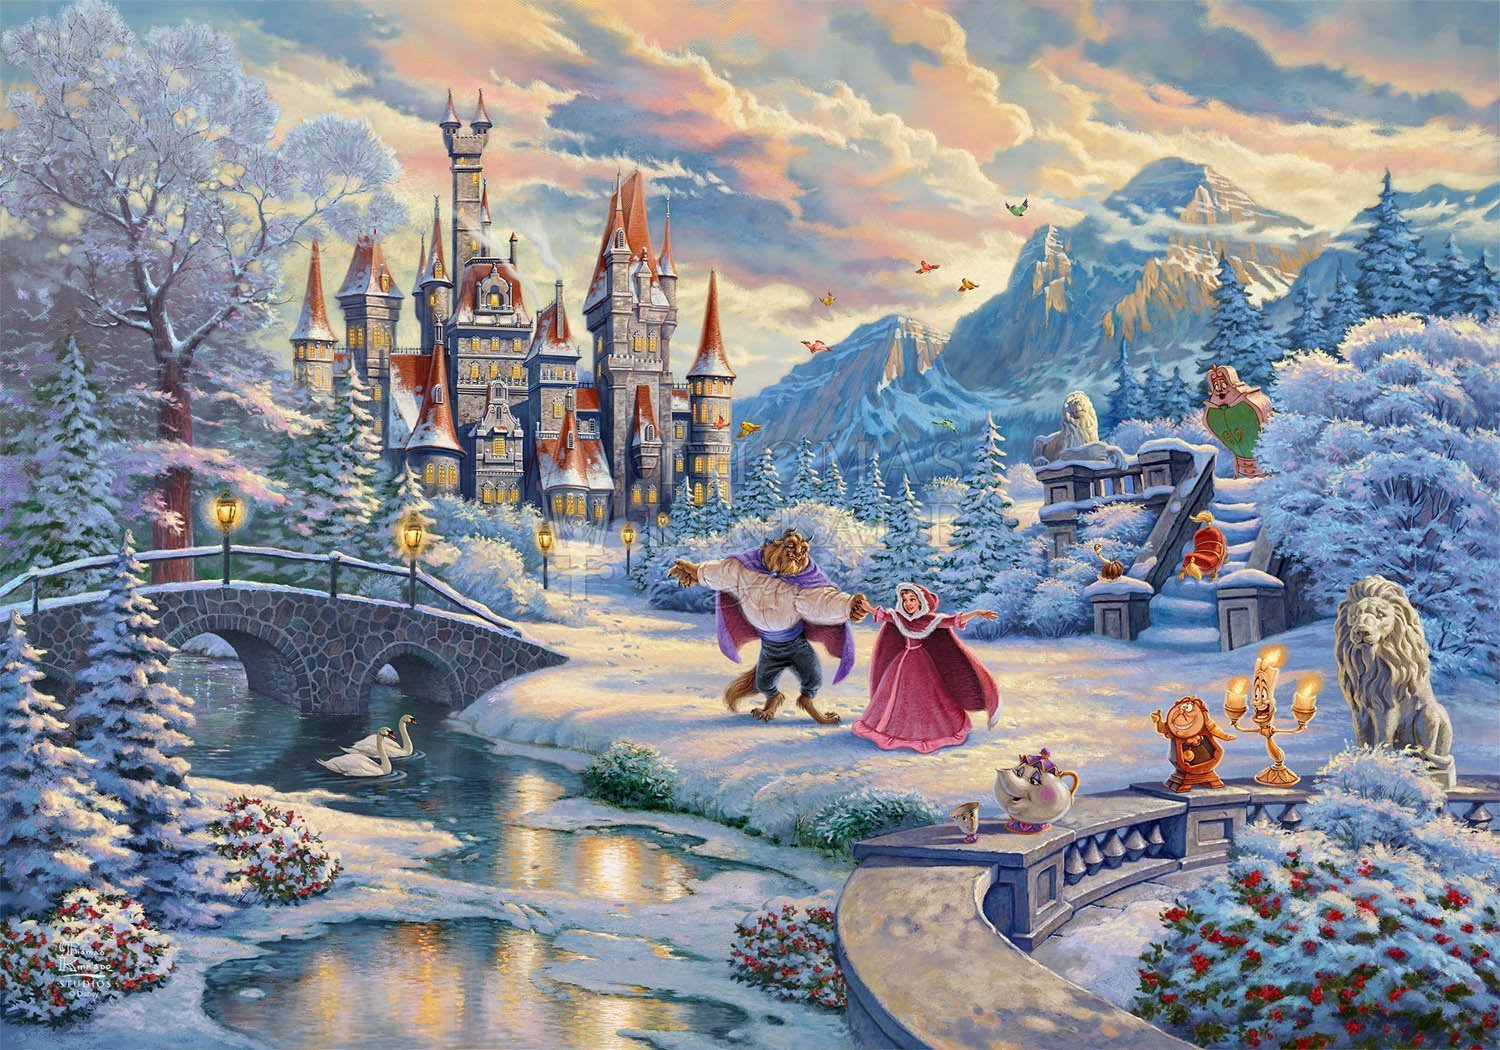 In Beauty and the Beast’s Winter Enchantment, both characters come to realize that their friendship has blossomed into love. While the two dance in the crisp winter snow - Unframed